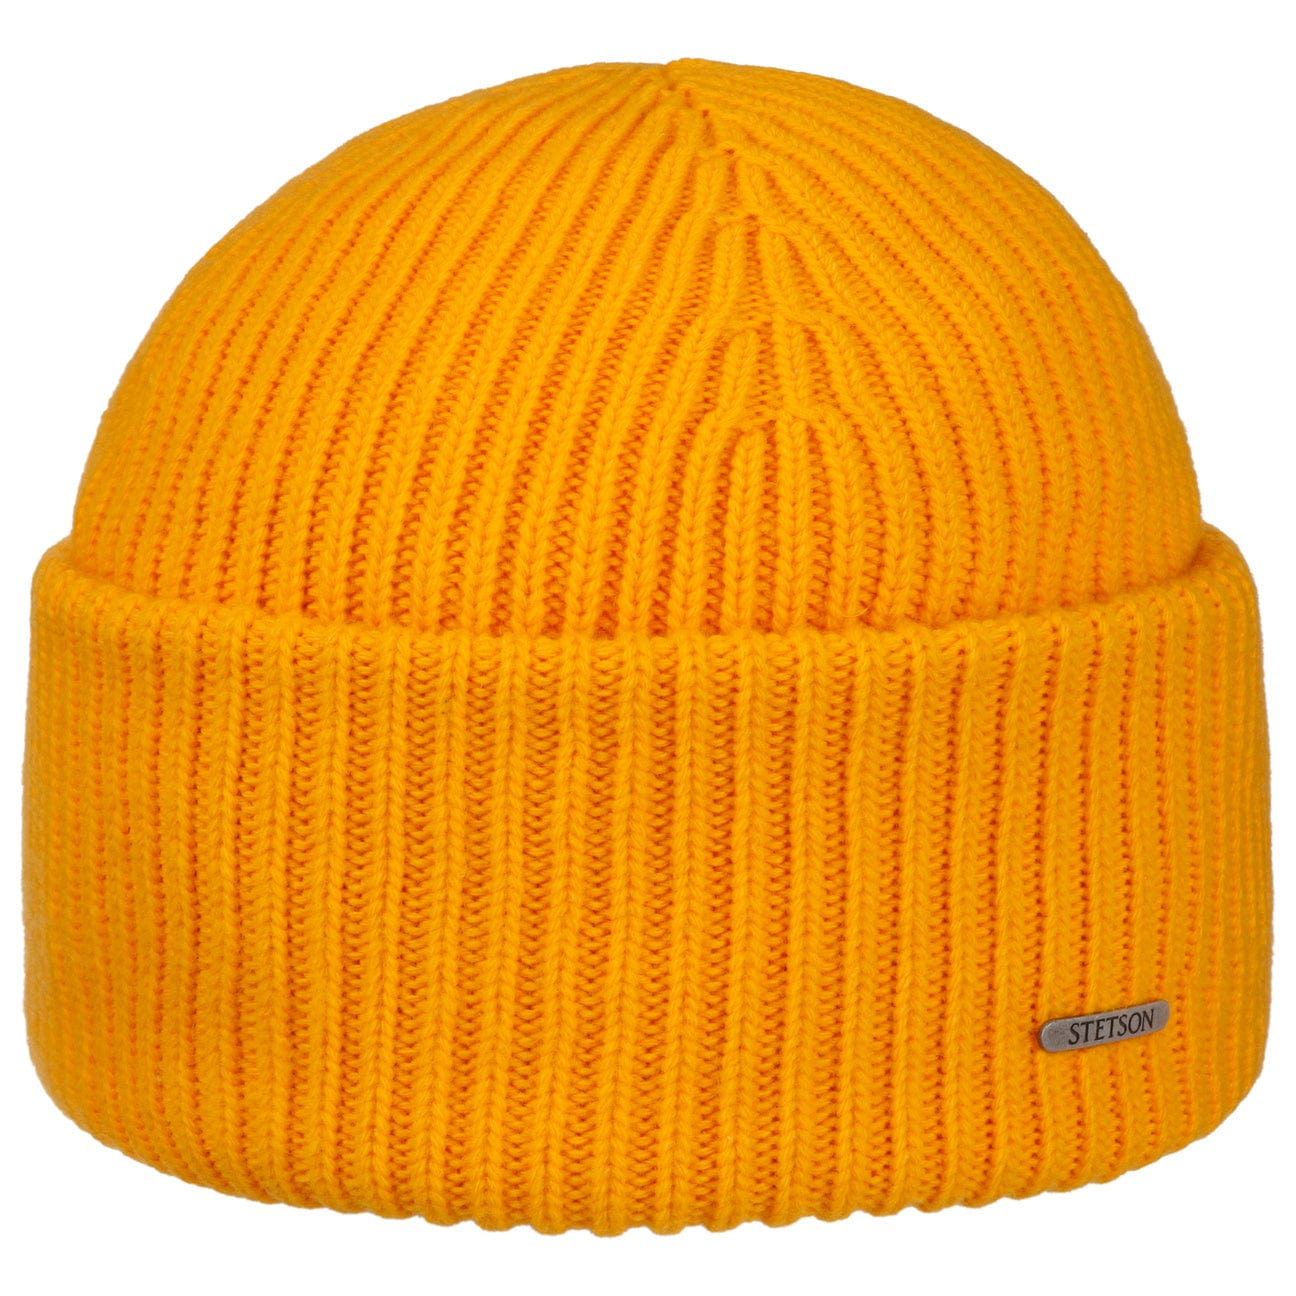 Stetson Yellow Hats for Men